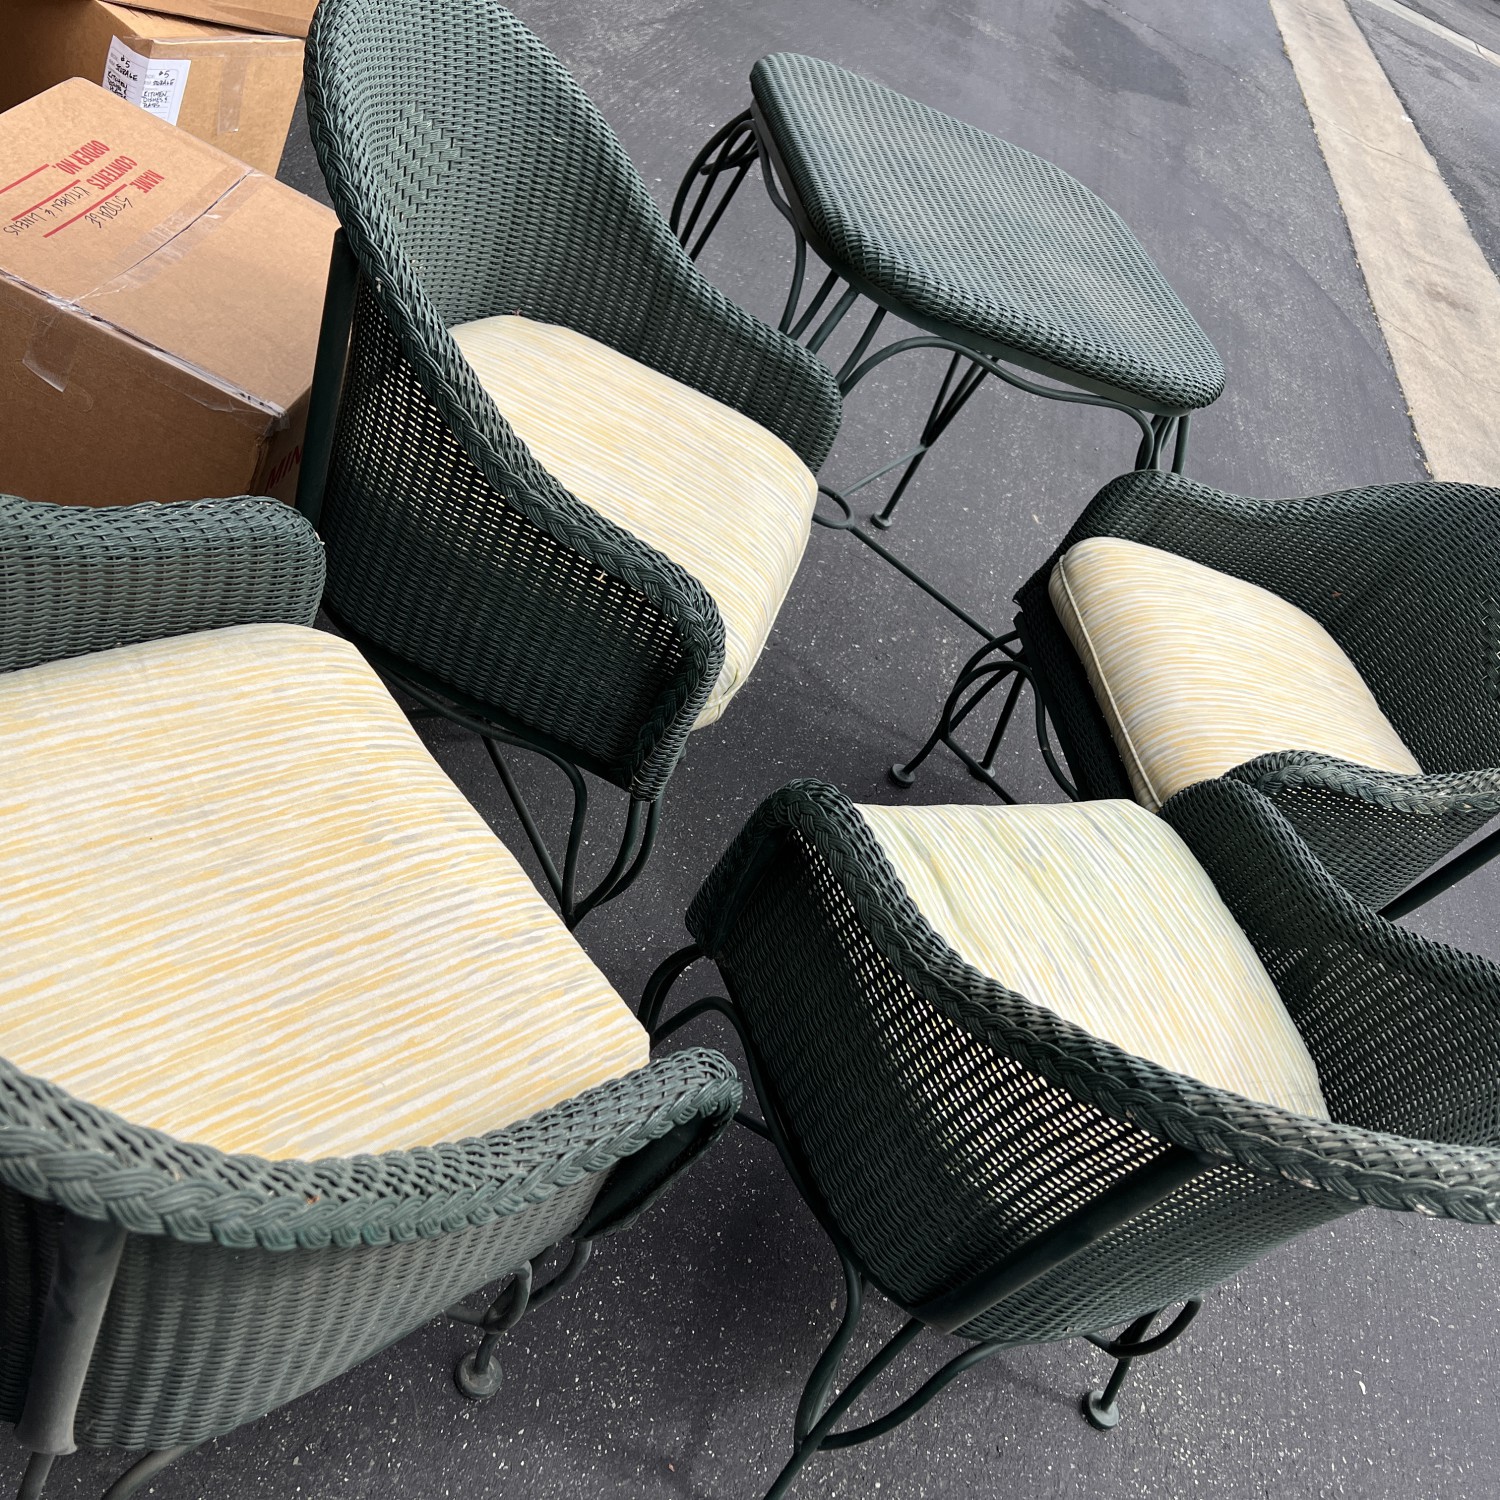 Marked down! Iron & Wicker balcony/patio set 4 chairs + 1 table